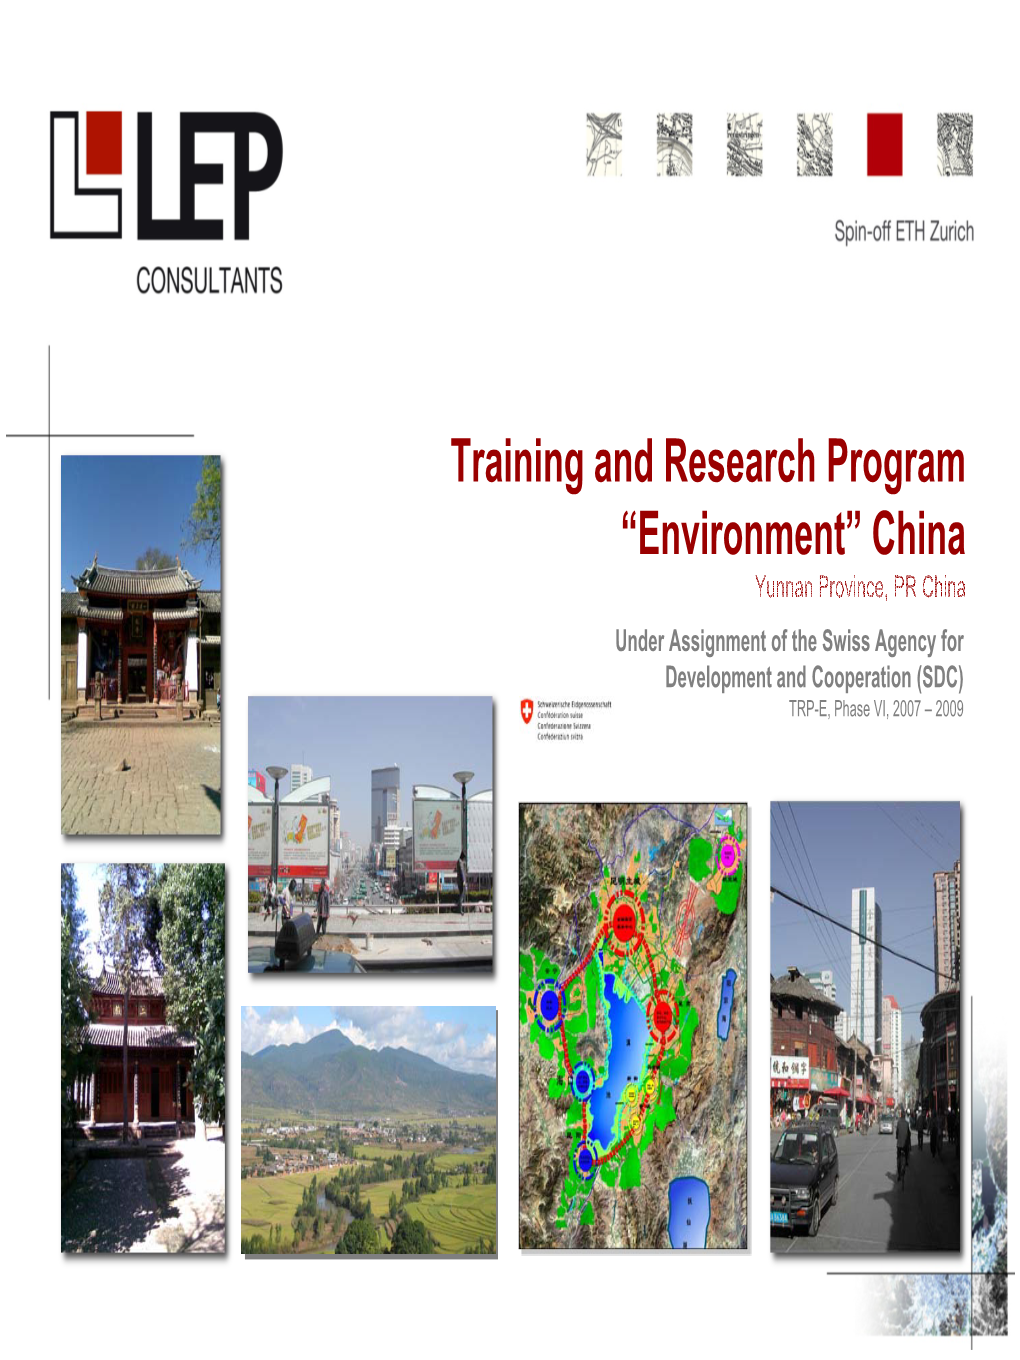 Training and Research Program “Environment” China